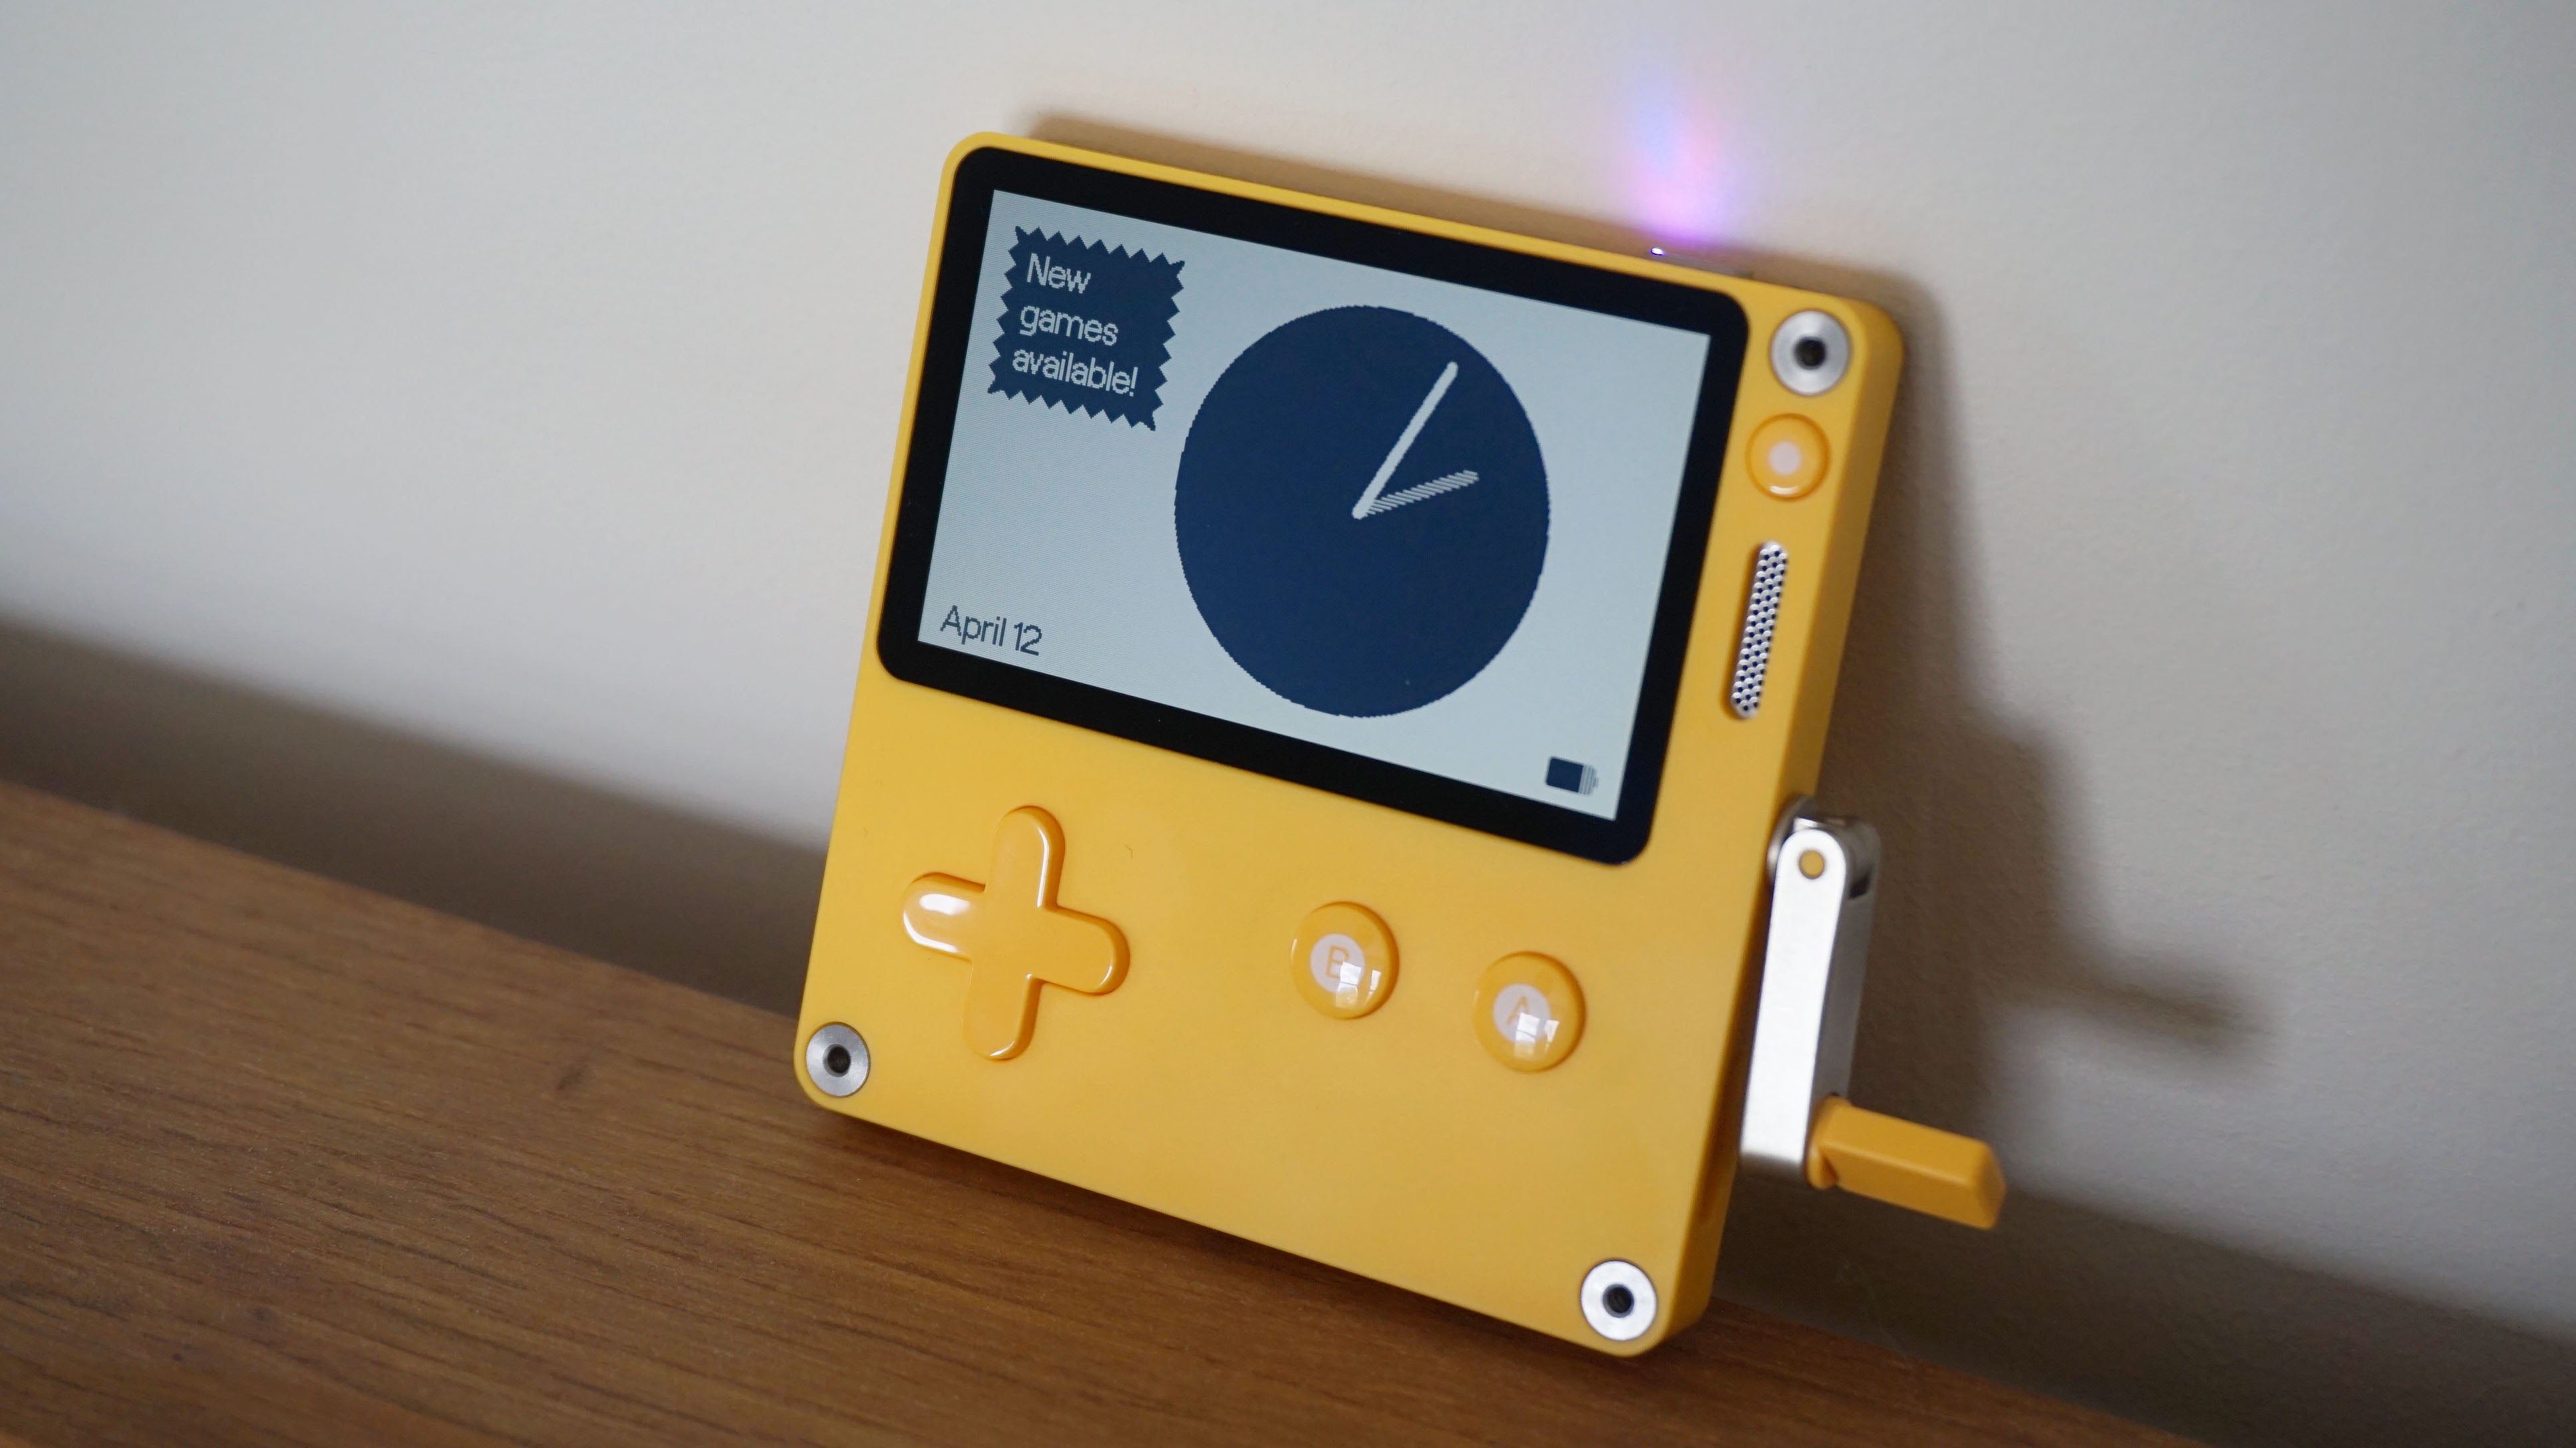 The Playdate leans against a white wall, showing the standby clock onscreen and a banner saying new games are available